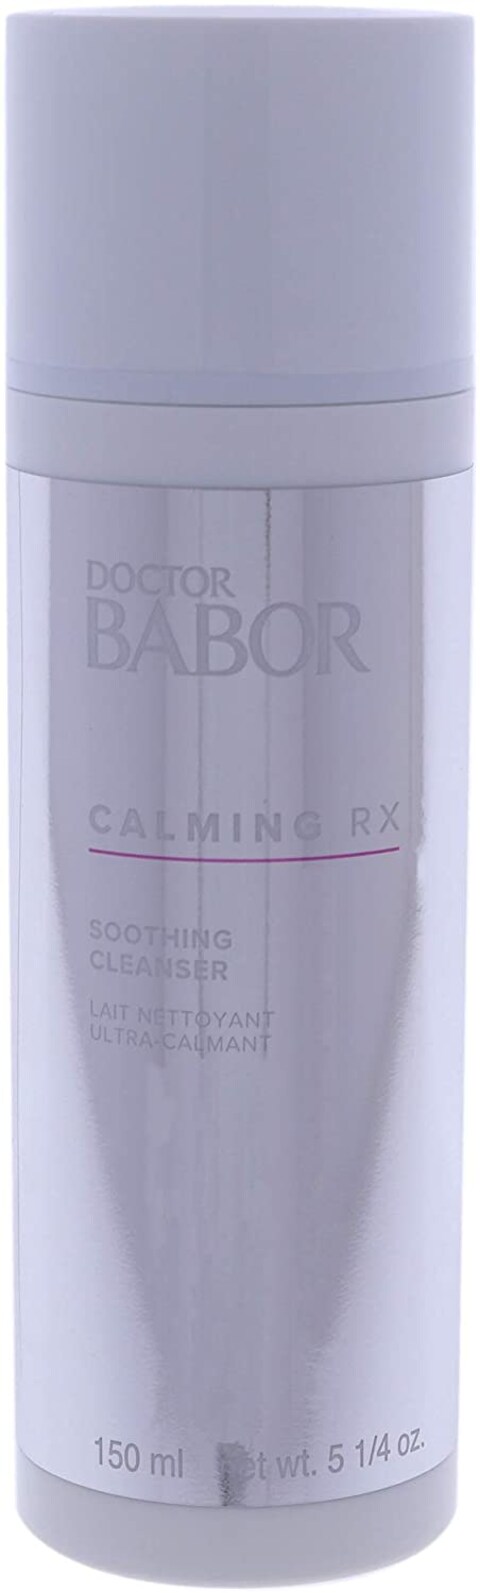 Babor Calming Rx Soothing Cleanser For Women 5.07 Oz